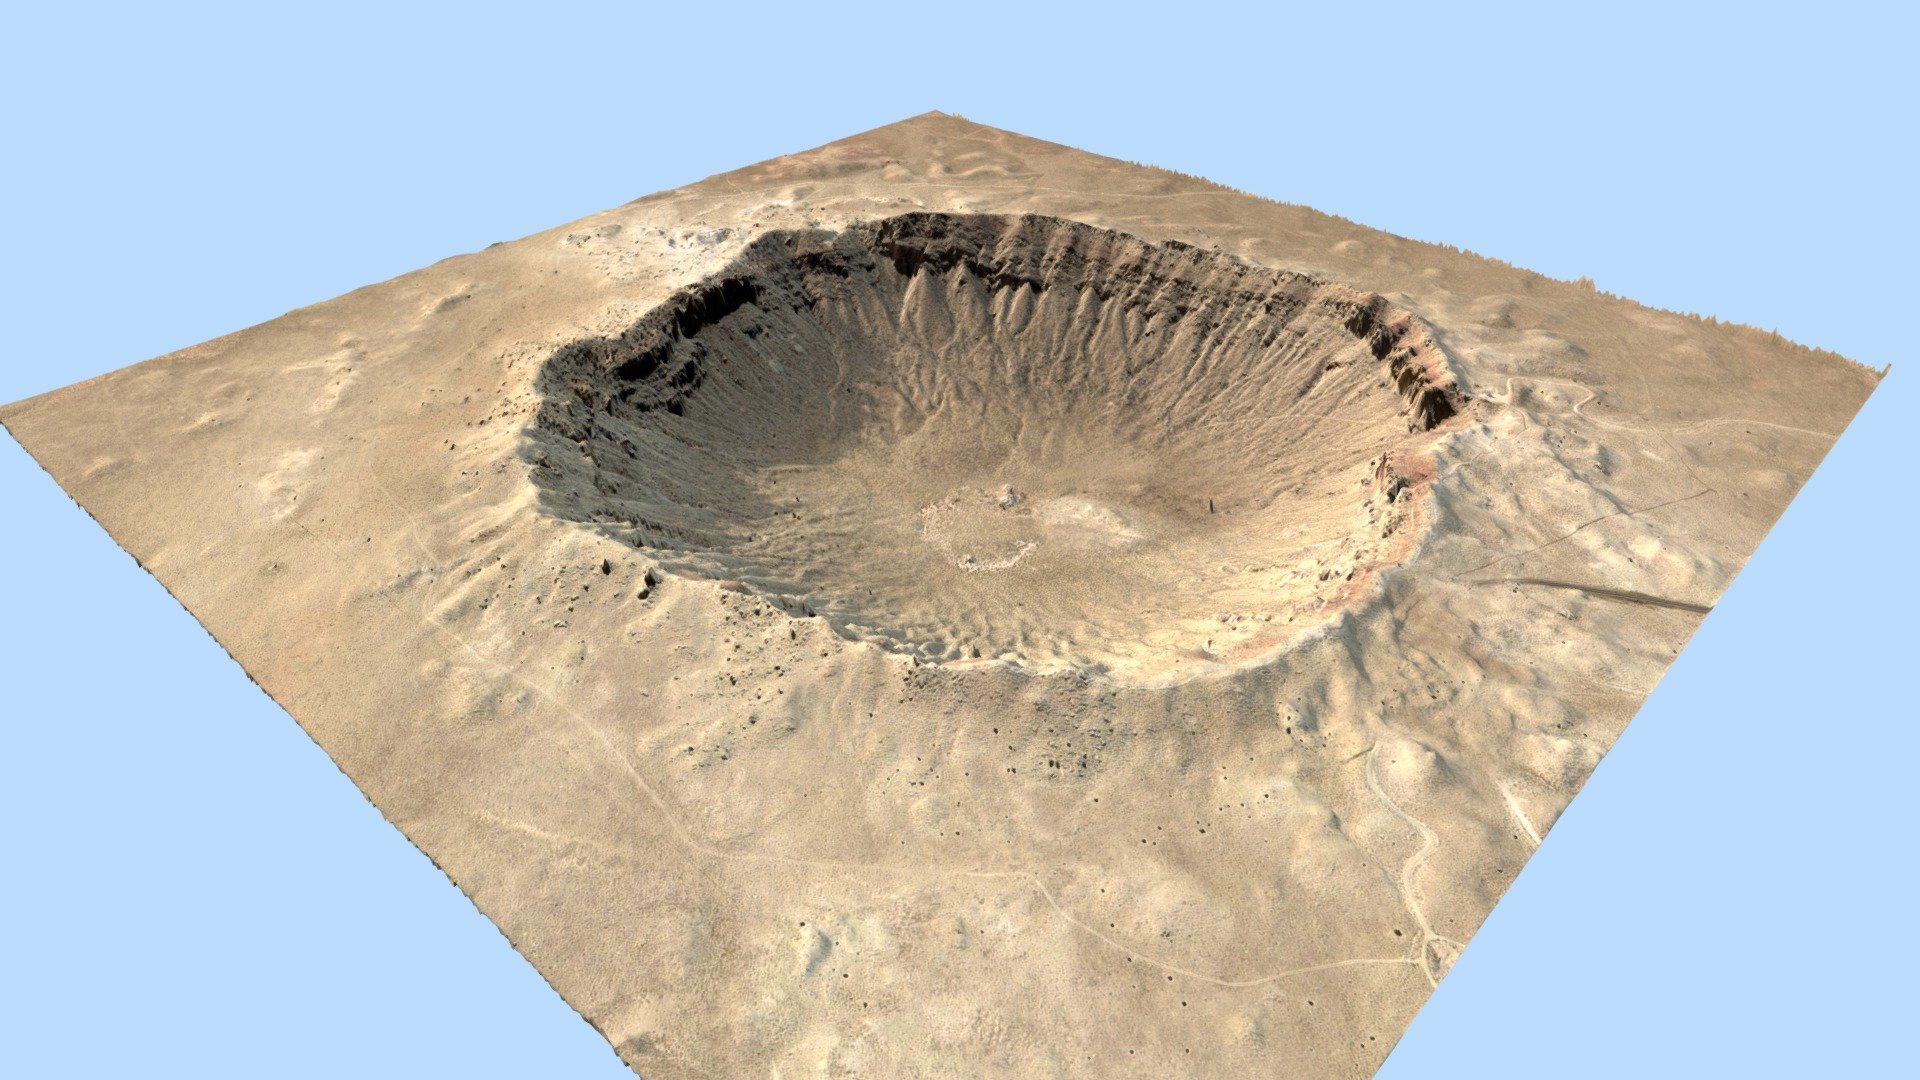 3D model of the Meteor Crater - a meteorite impact crater in the northern Arizona desert of the United States. Native file is from Blender 2.79 using standard render. Export files are available in fbx and obj formats 3d model